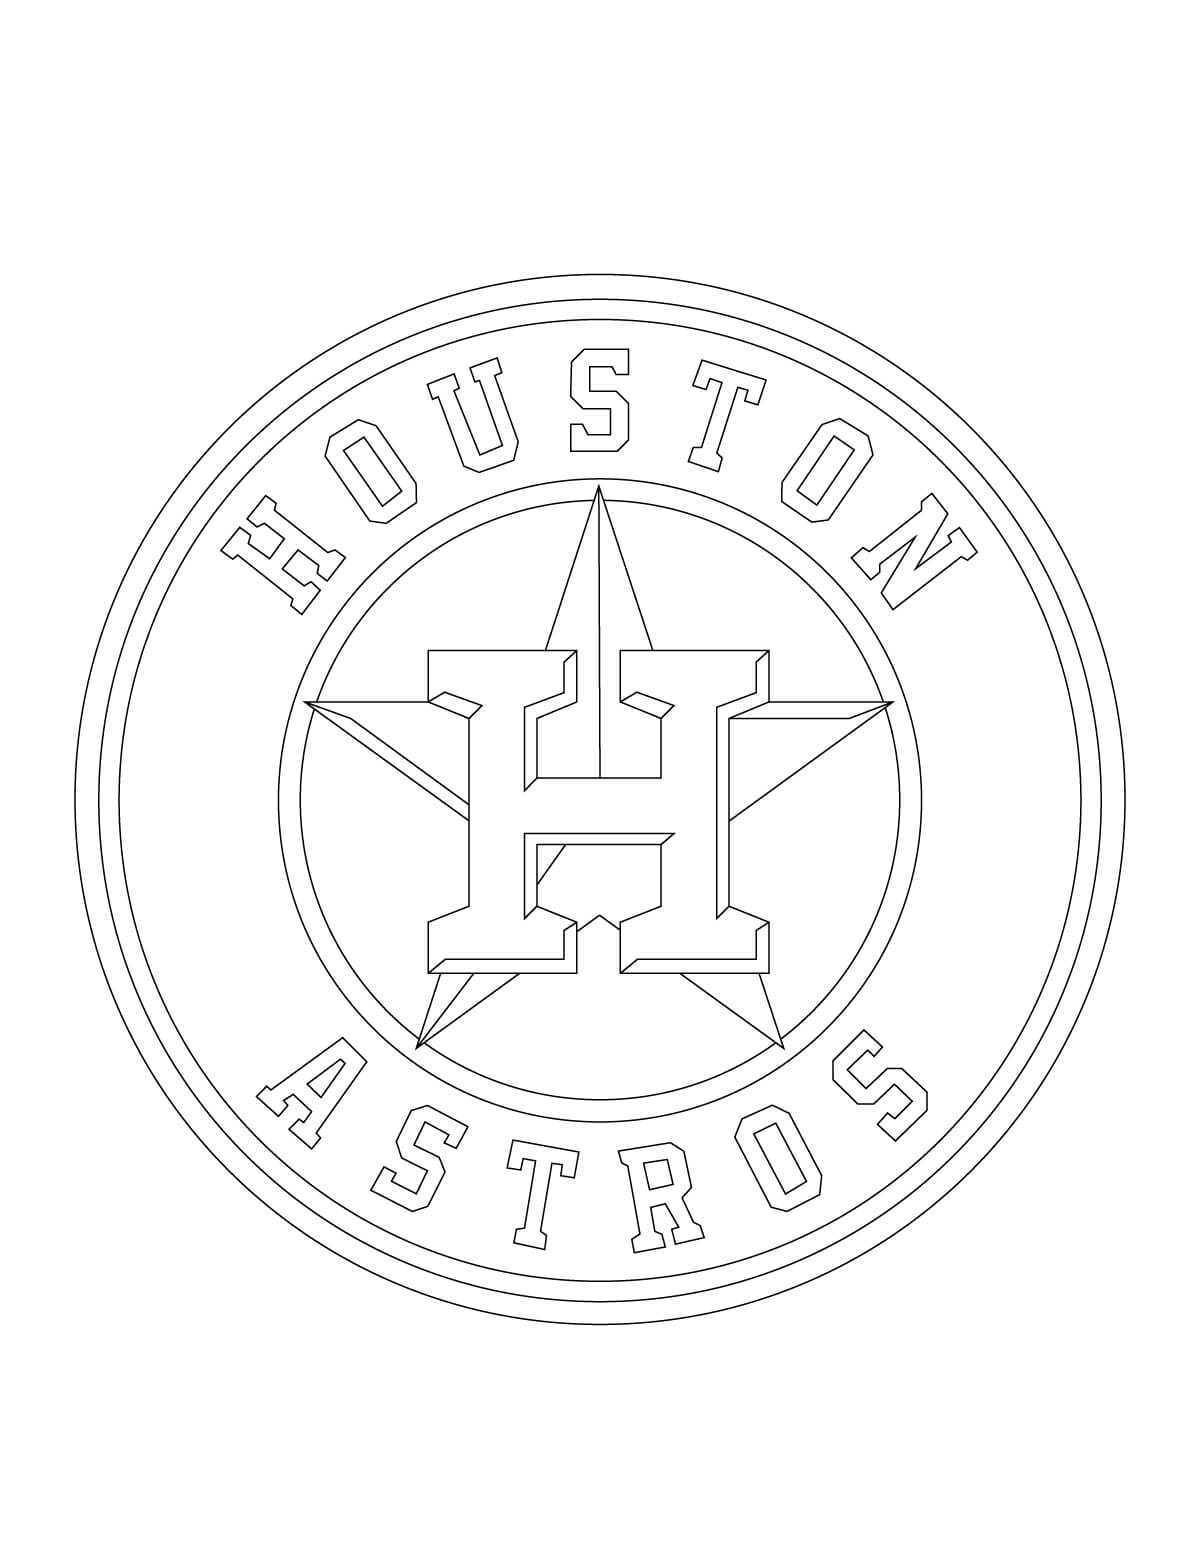 Free Astros Coloring Pages Pdf - houston astros coloring pages